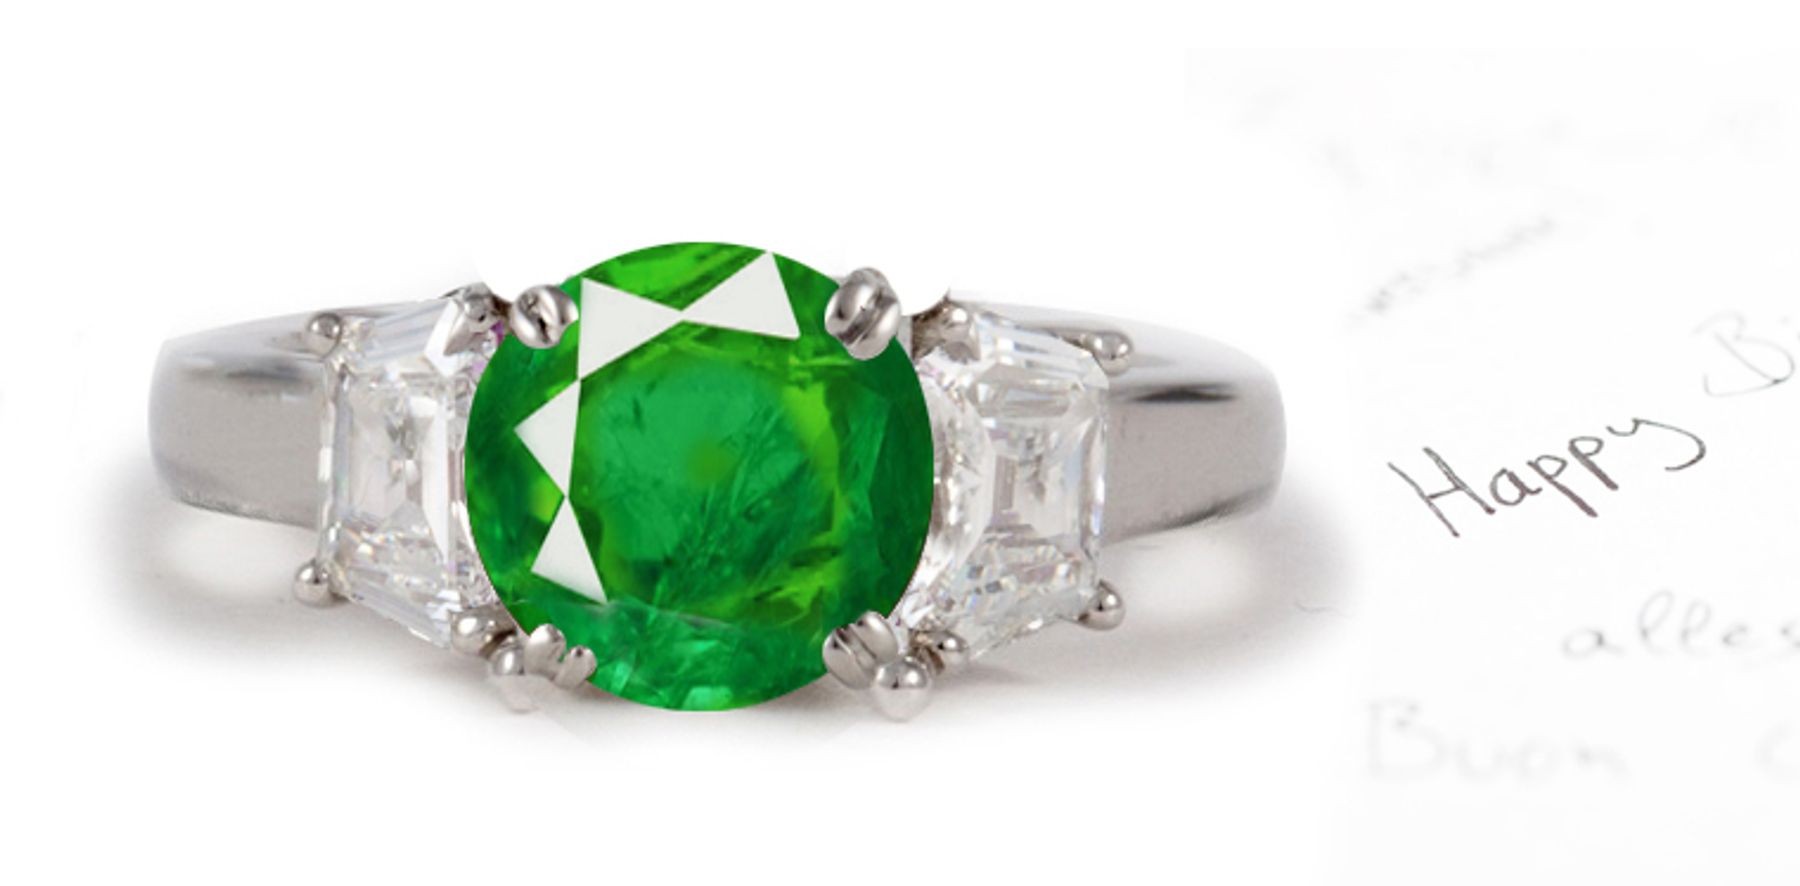 Immense Store of Emeralds:Stunning Emerald & Diamond Three-Stone Ring in 14k White Gold & Platinum From Mexico